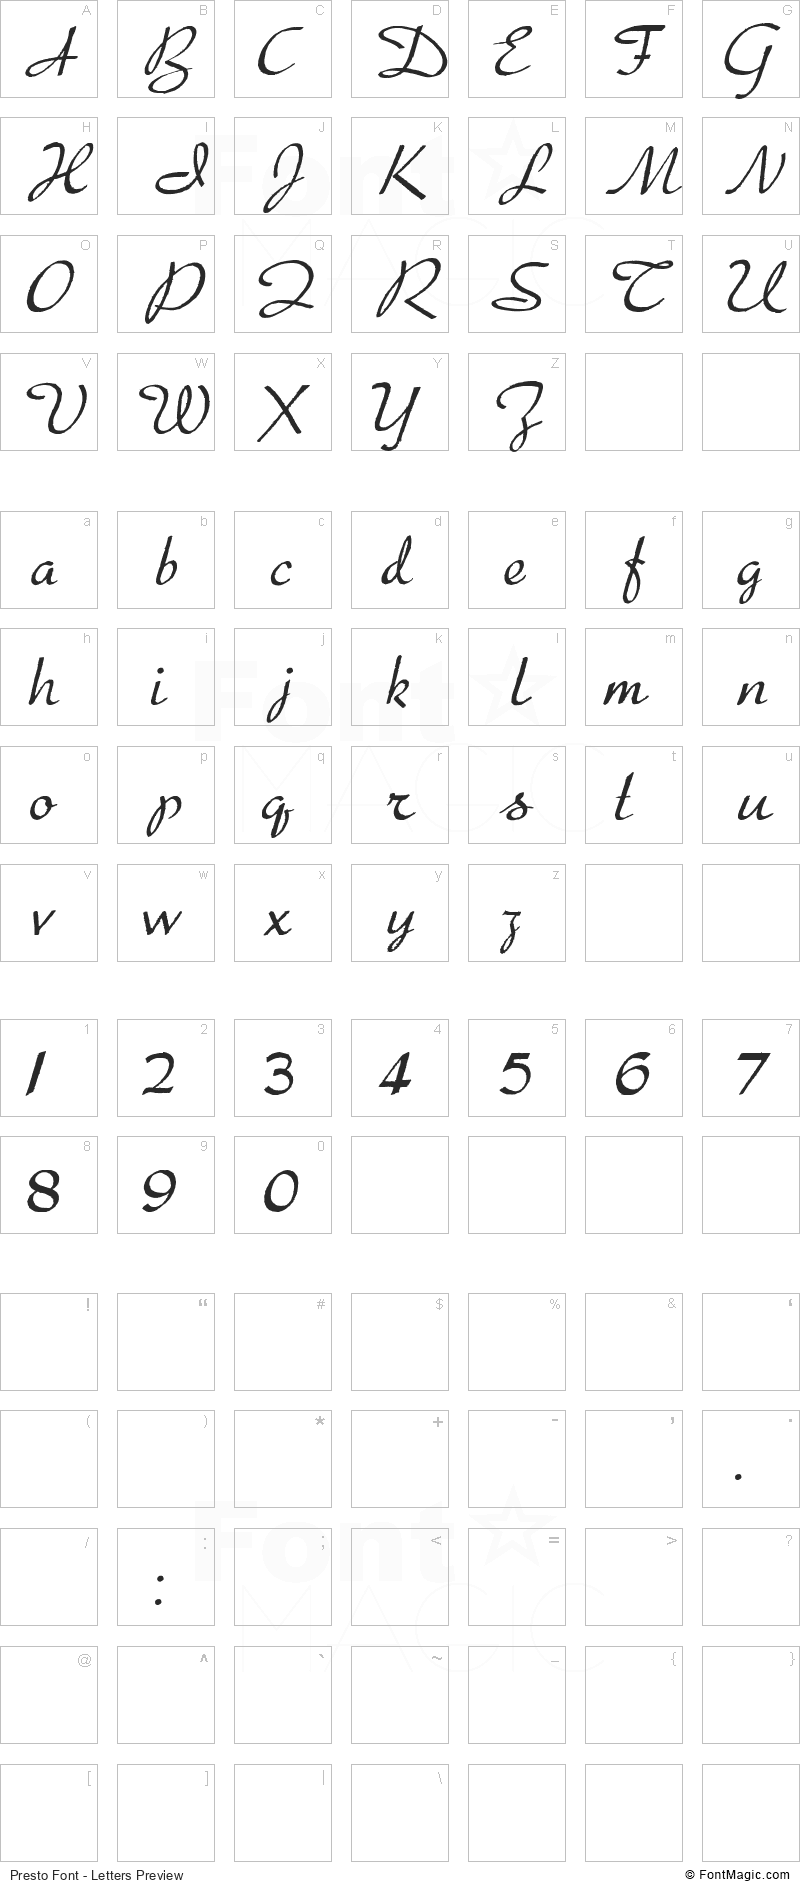 Presto Font - All Latters Preview Chart